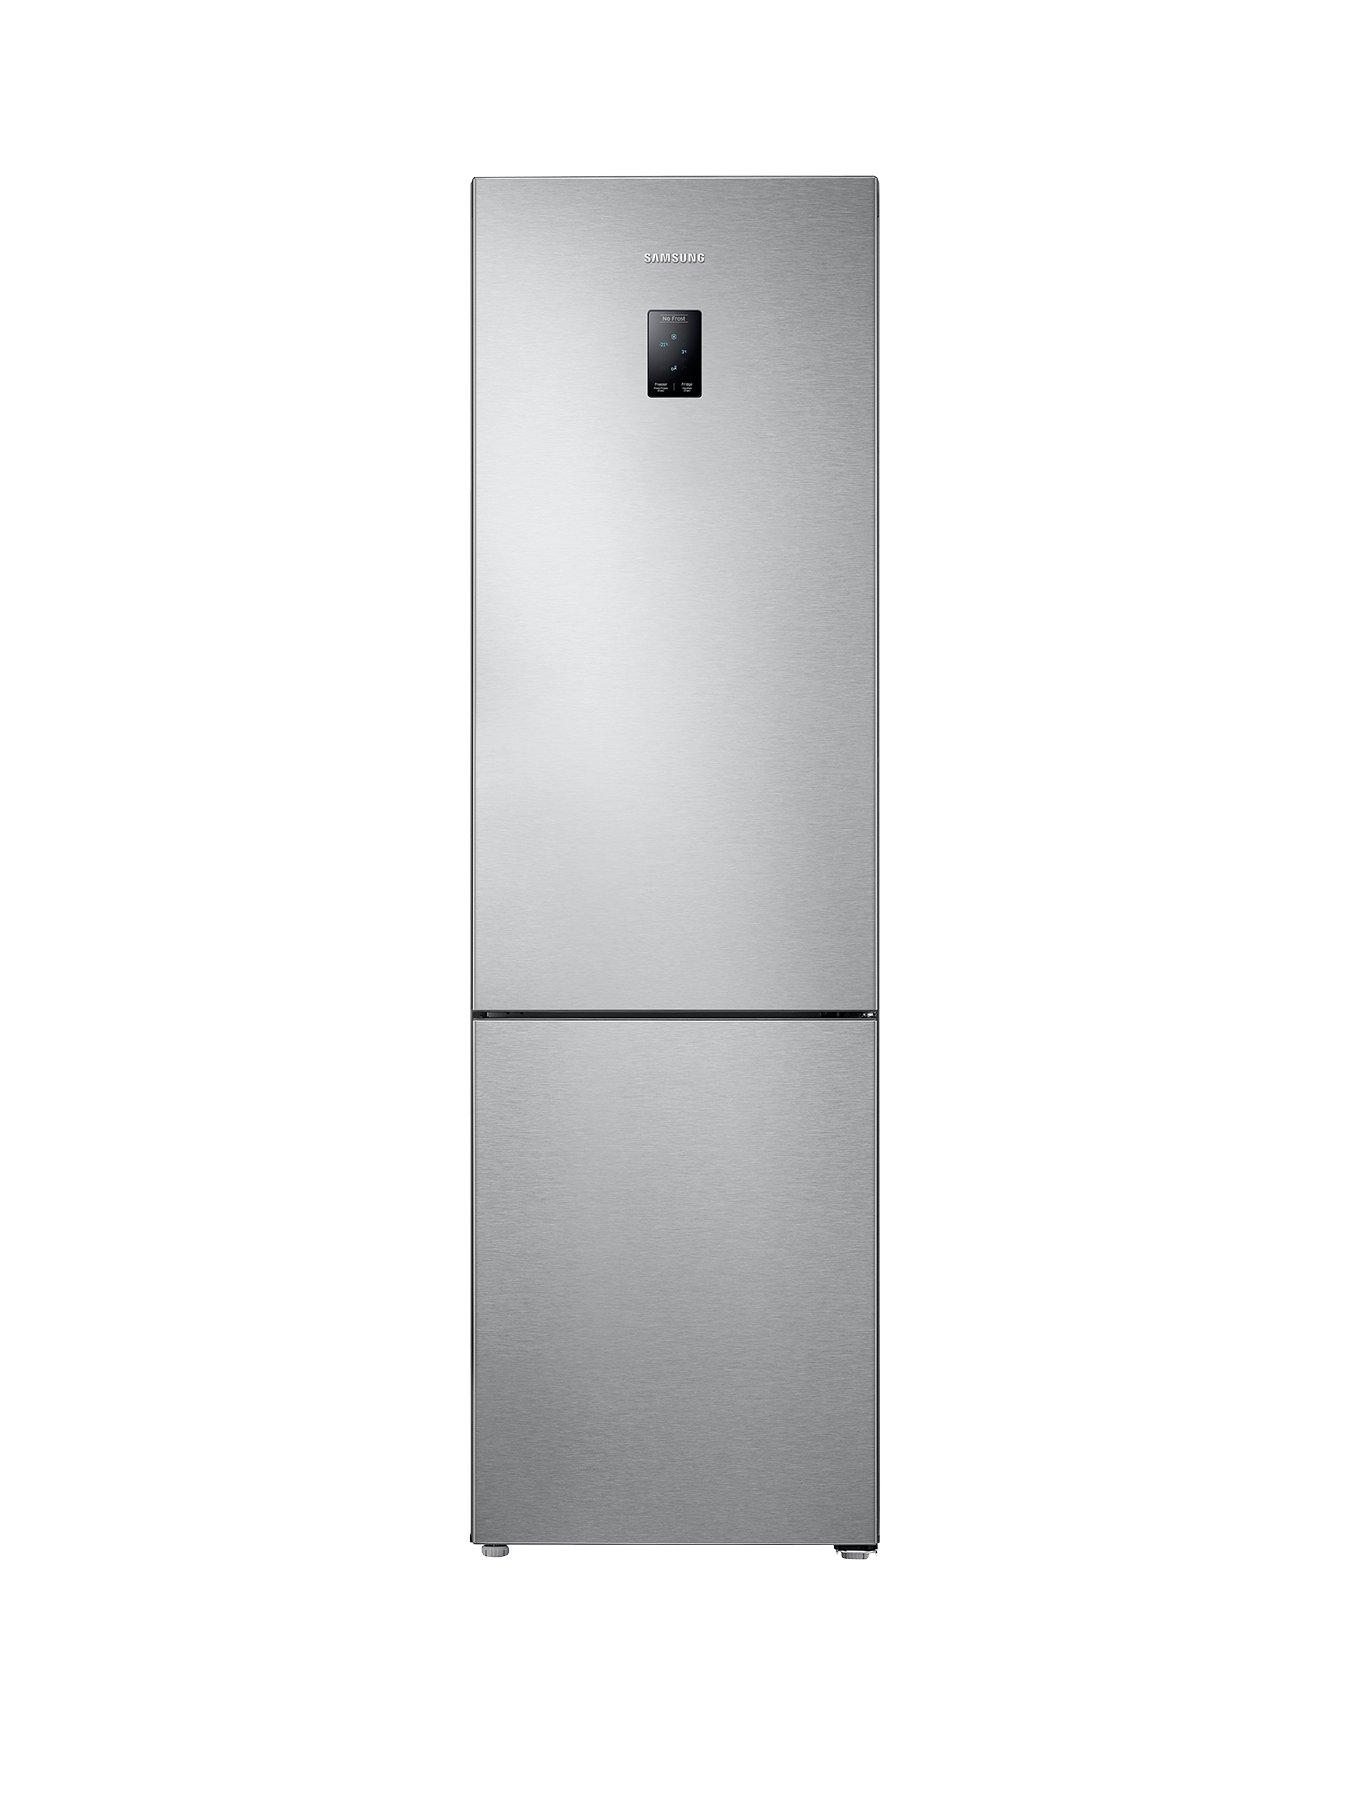 Samsung Rb37J5230Sa/Eu 60Cm Fridge Freezer With All-Around Cooling System And 5 Year Samsung Parts And Labour Warranty – Silver